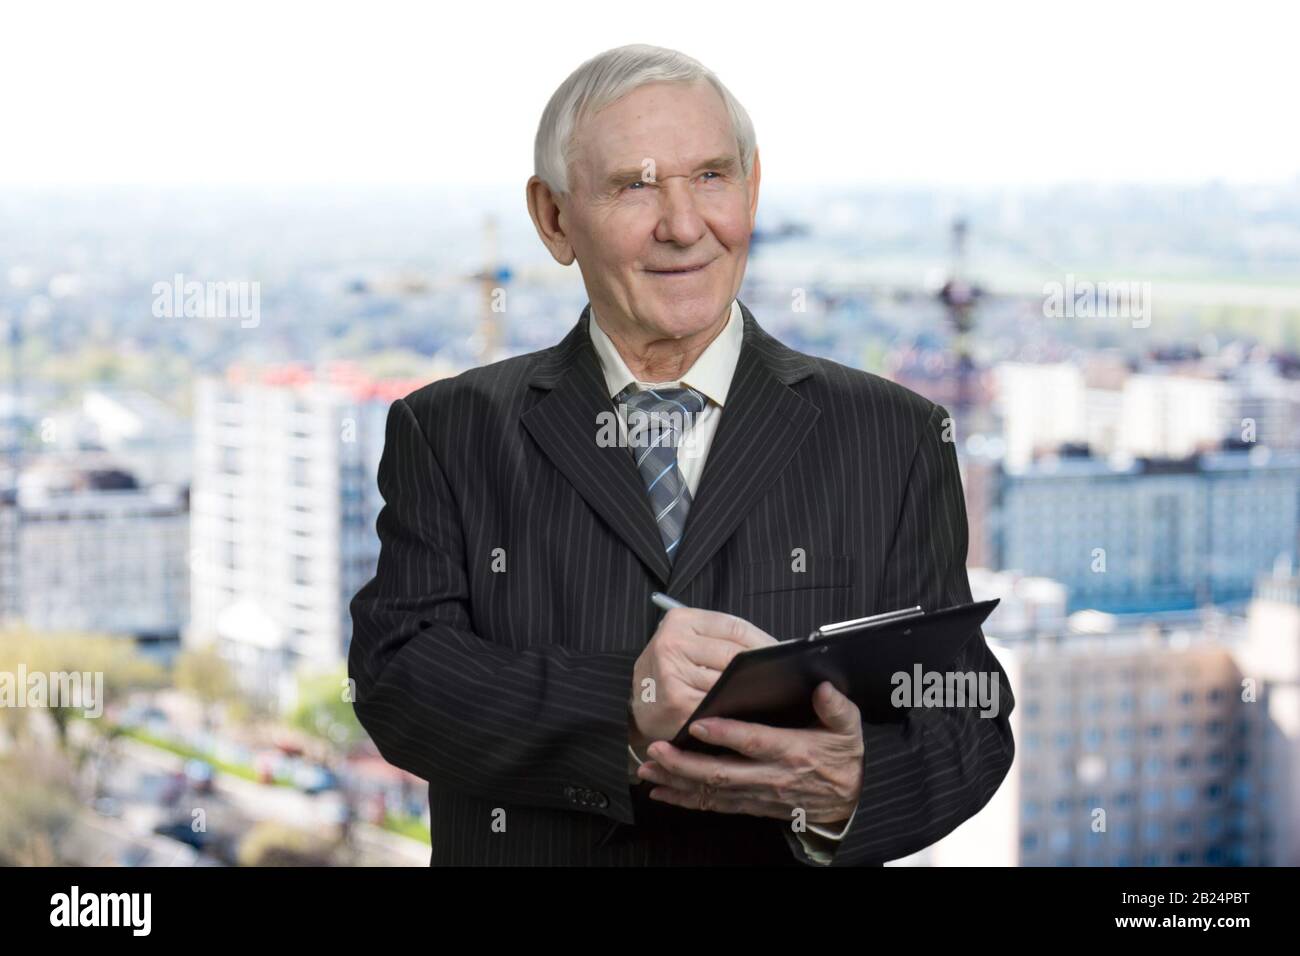 Old man in suit writing down on clipboard. Stock Photo